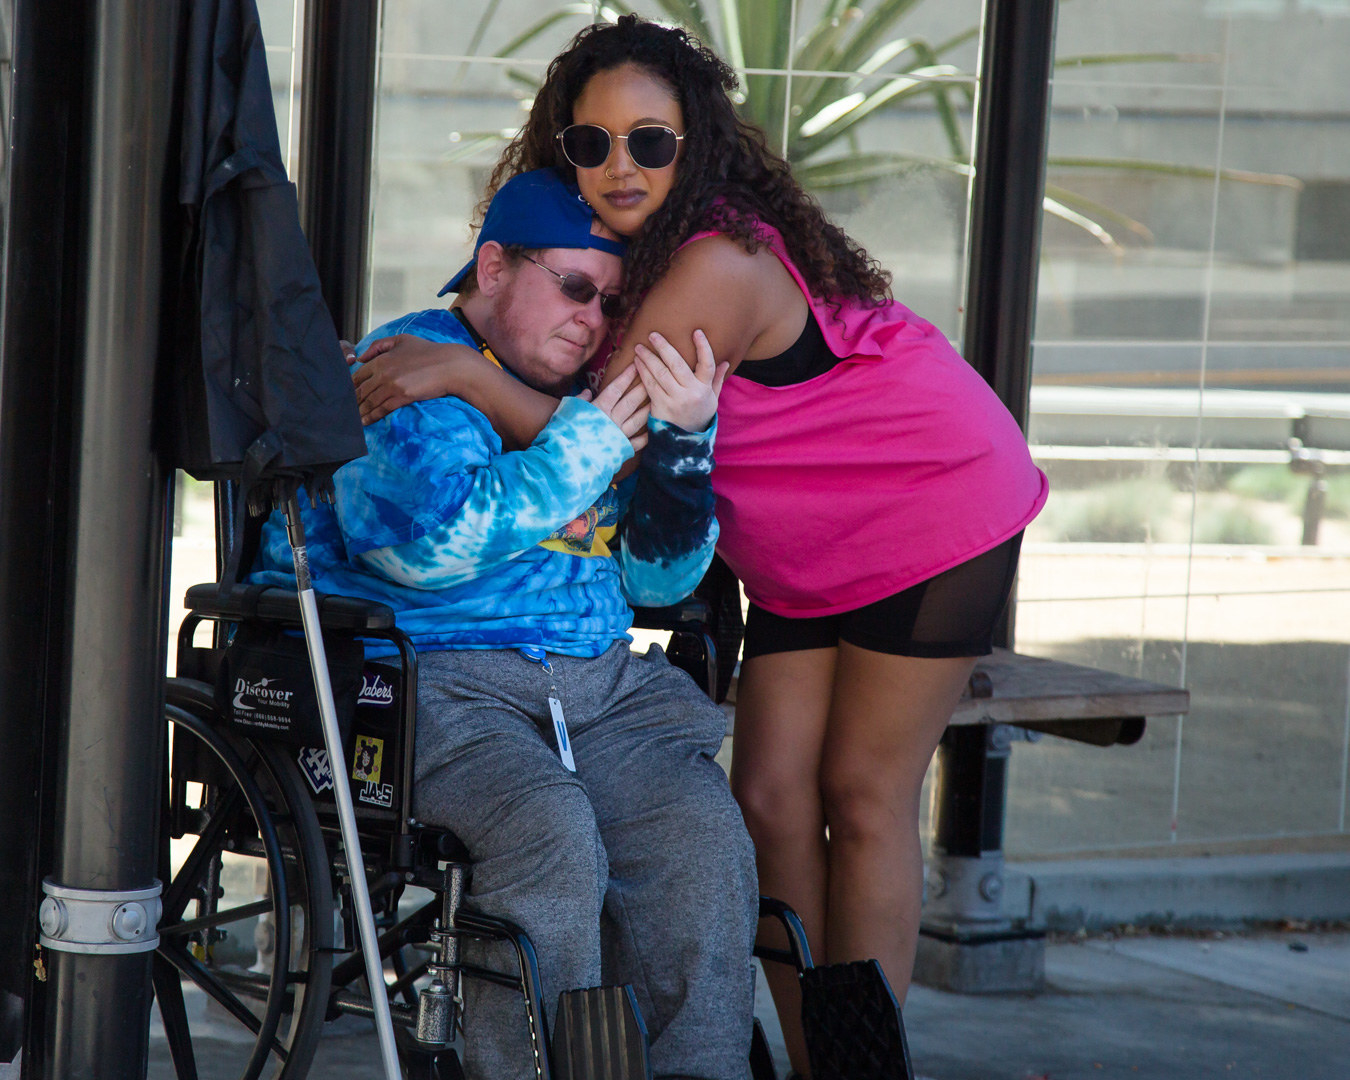 A person in a wheelchair and a person who is standing embrace